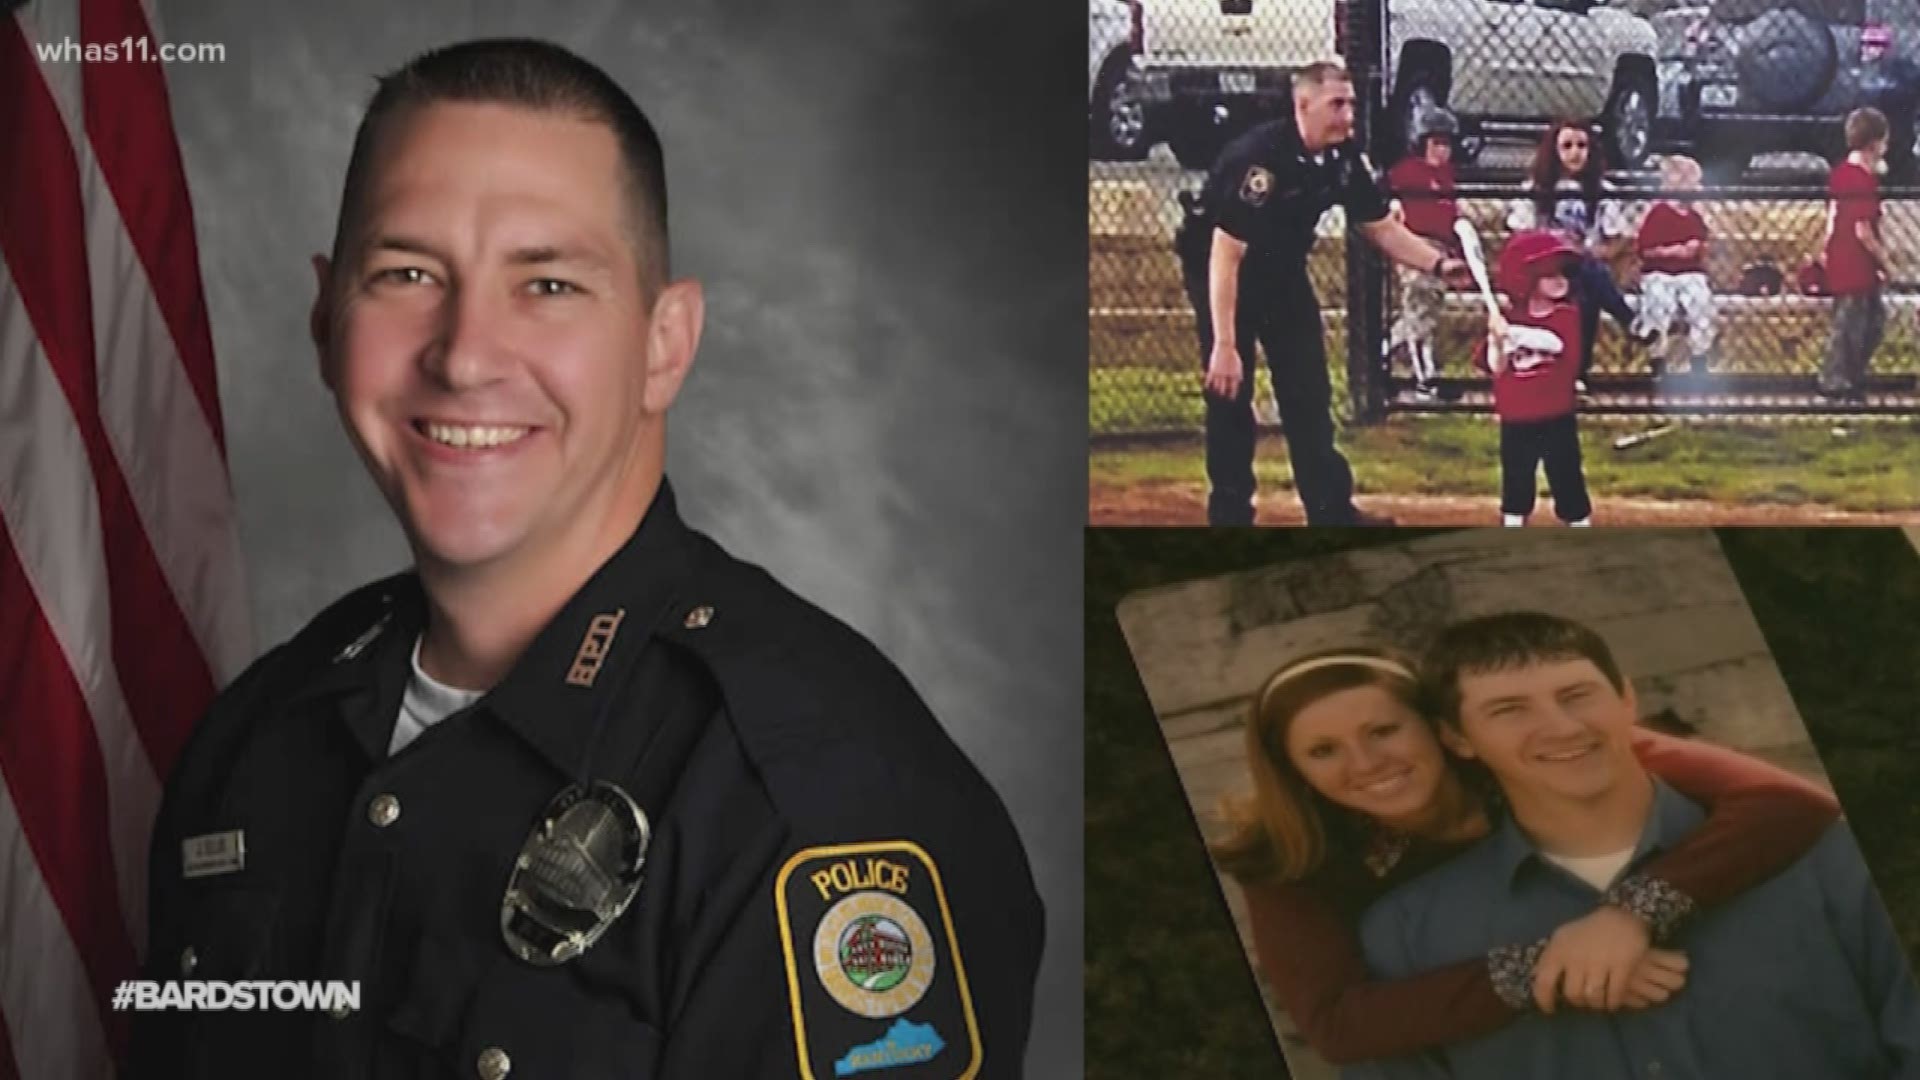 Officer Jason Ellis was on his way home when something caused him to stop near Bluegrass Parkway. He never made it home.